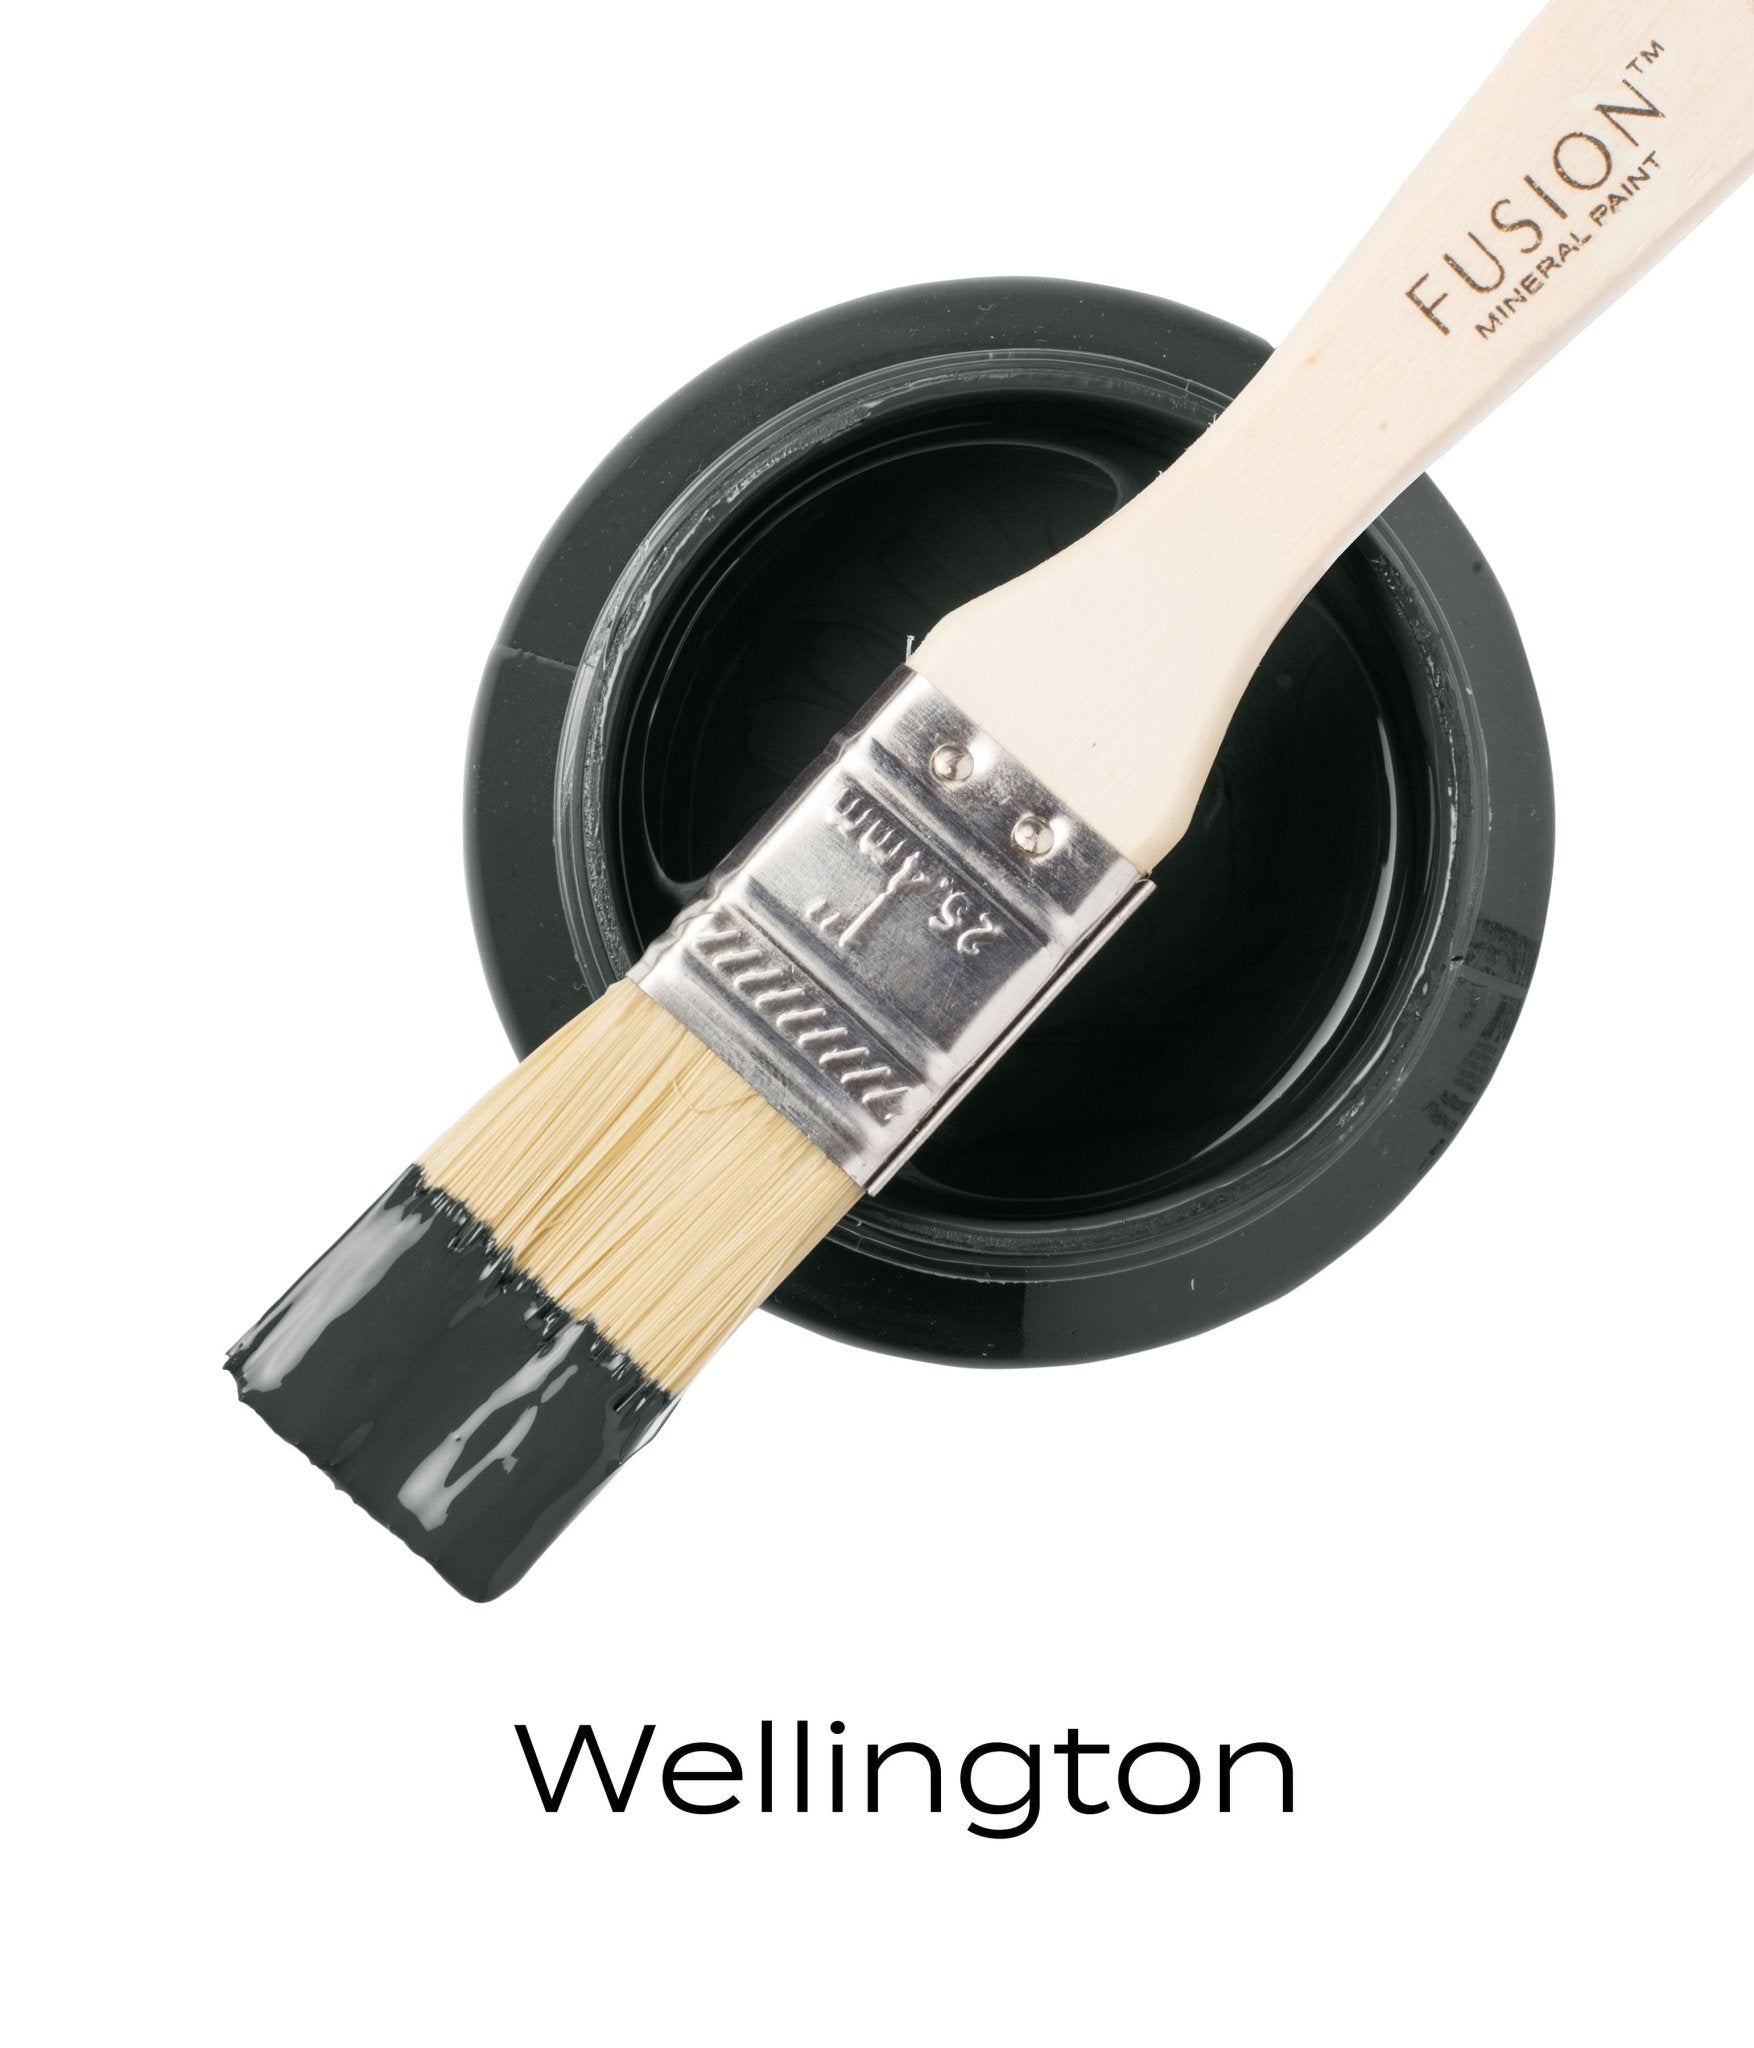 Fusion Mineral Paint - Wellington - Rustic River Home